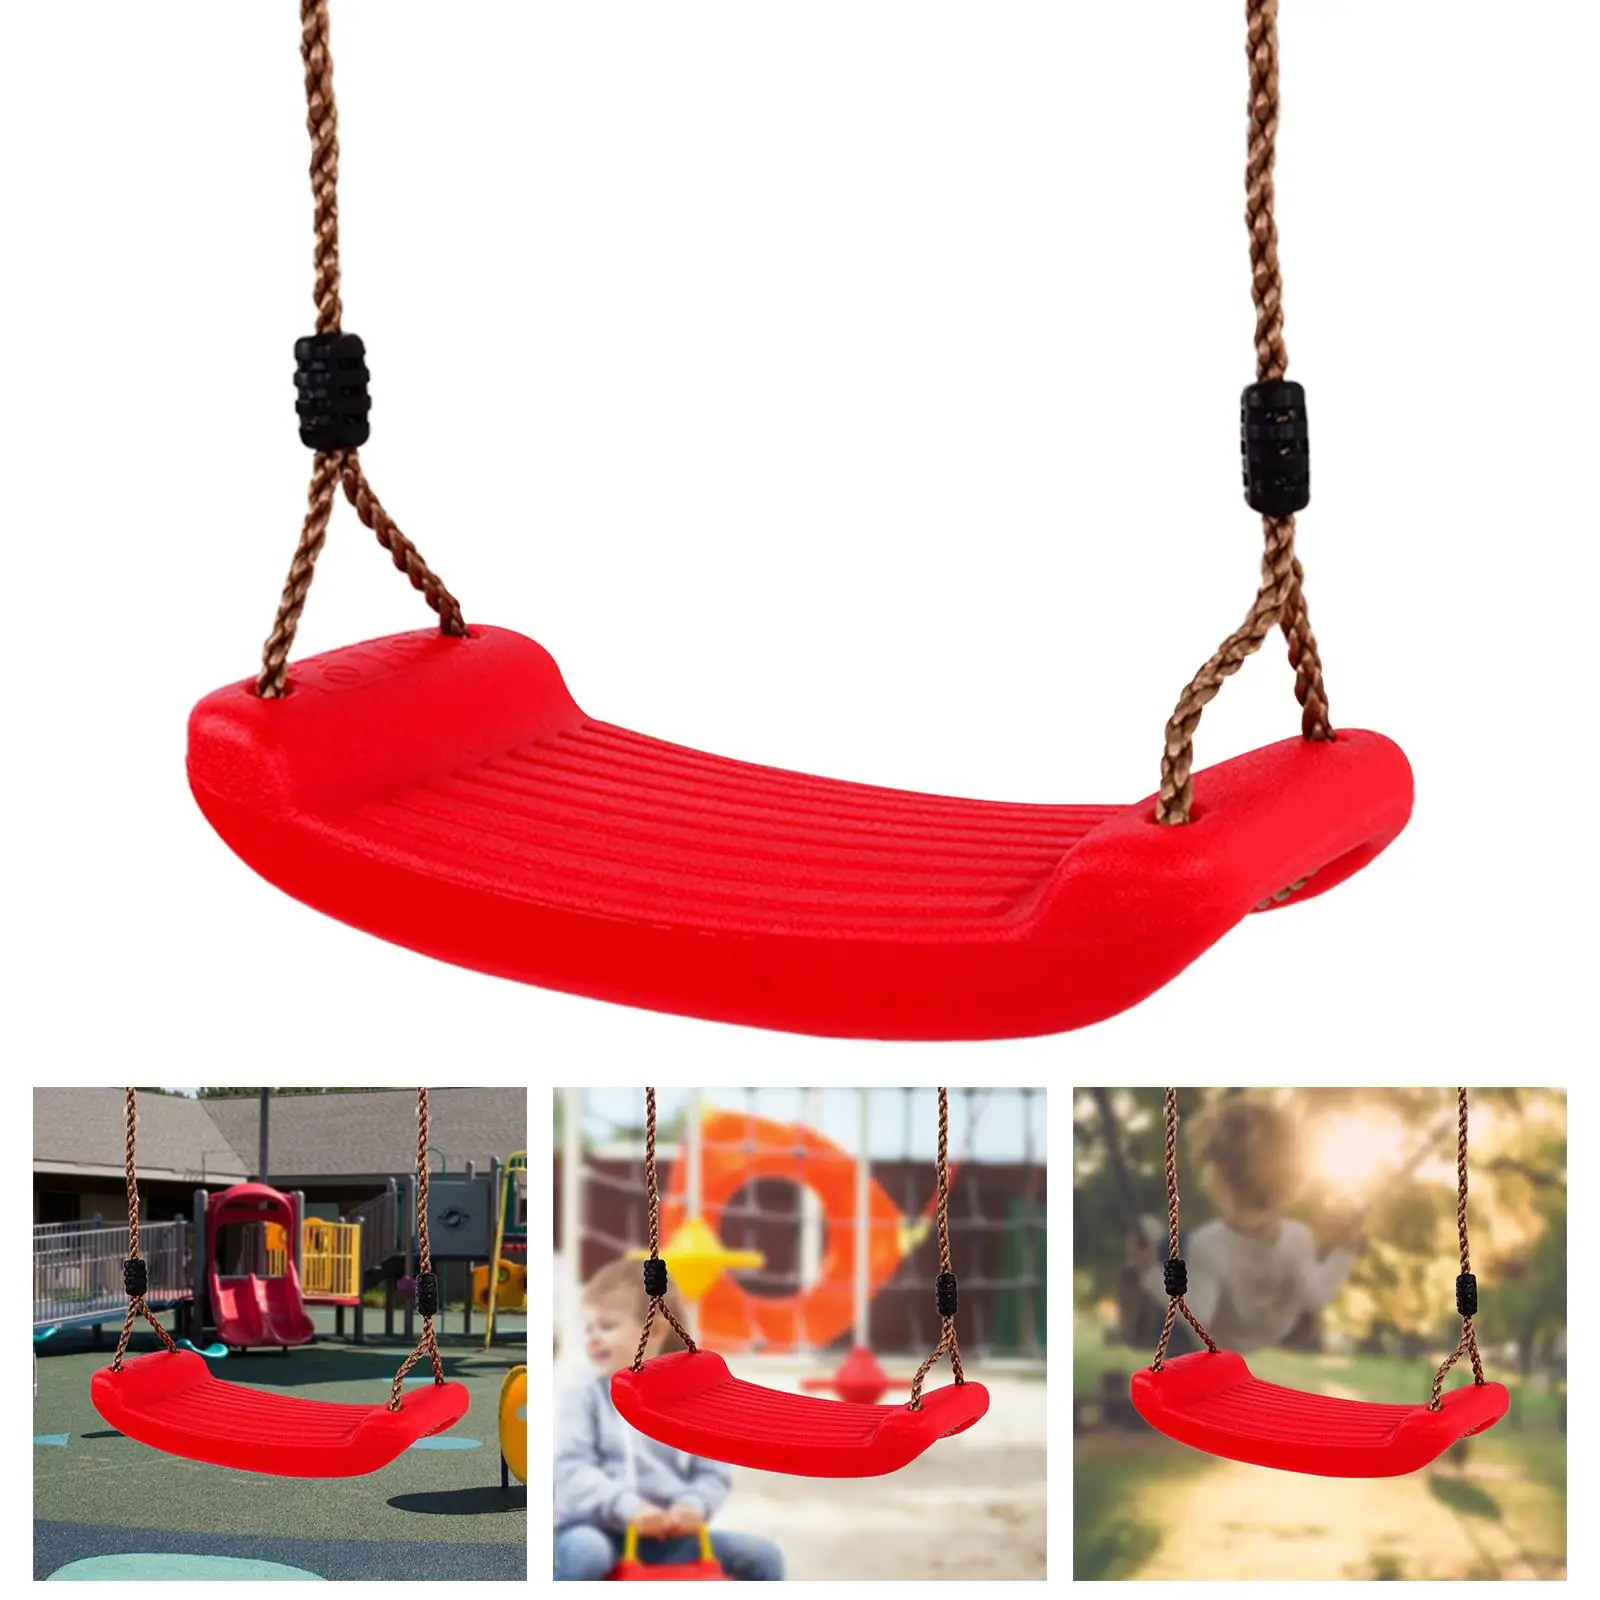 Hanging Seat Toys Flying Toy Garden Swing Kids with Height Adjustable Ropes Indoor Outdoor Toys Curved Board Kids Swing